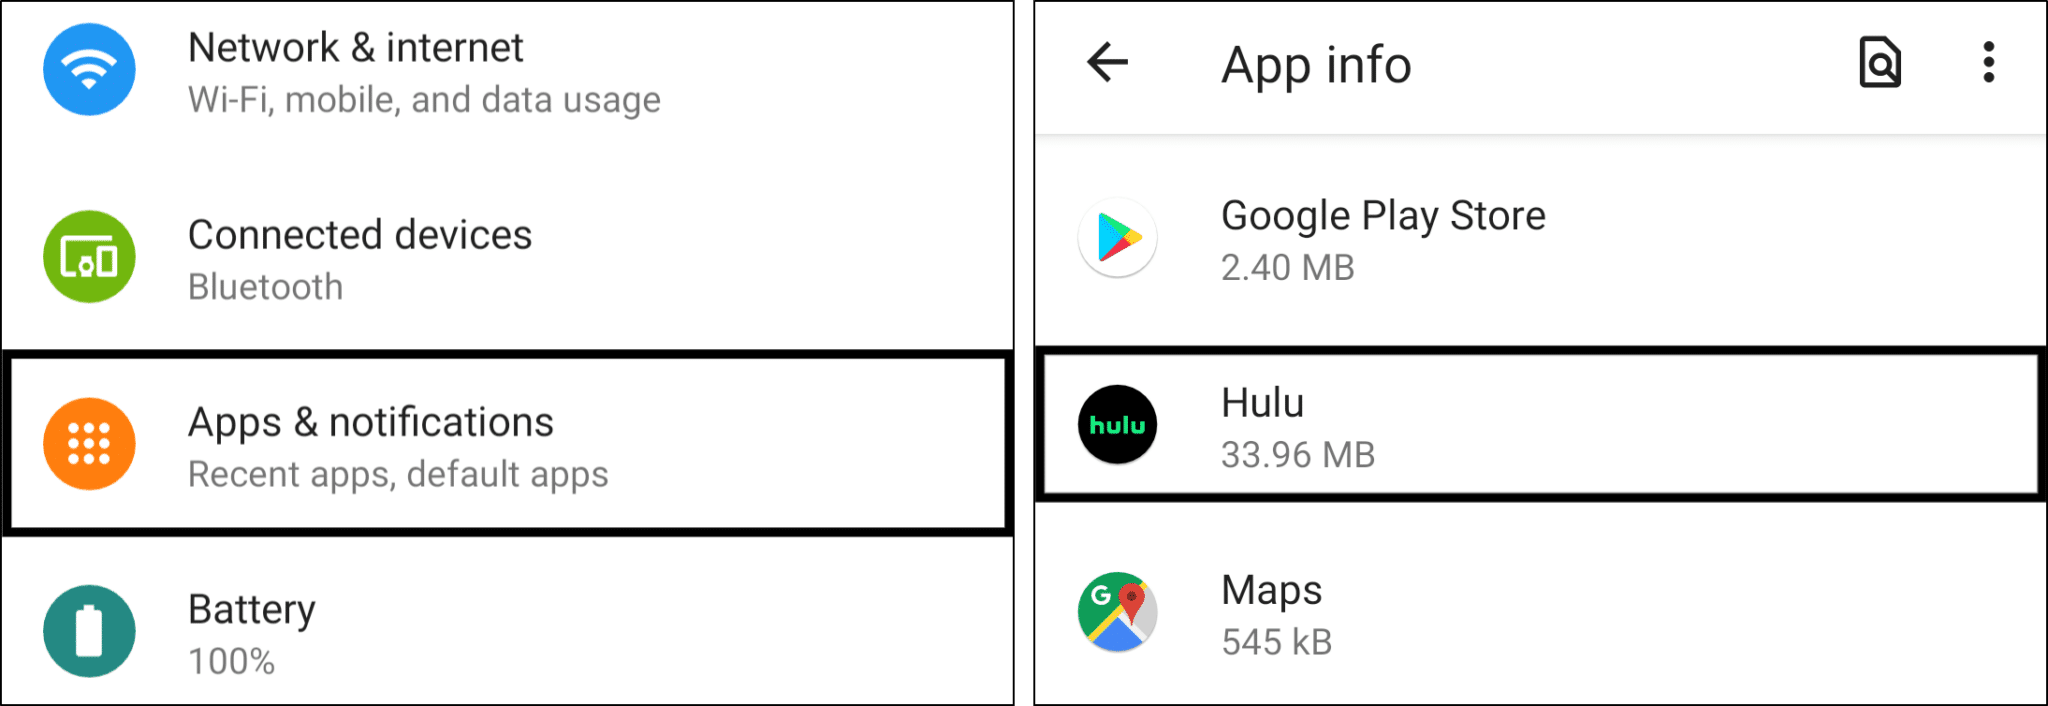 access Hulu settings in system settings on Android